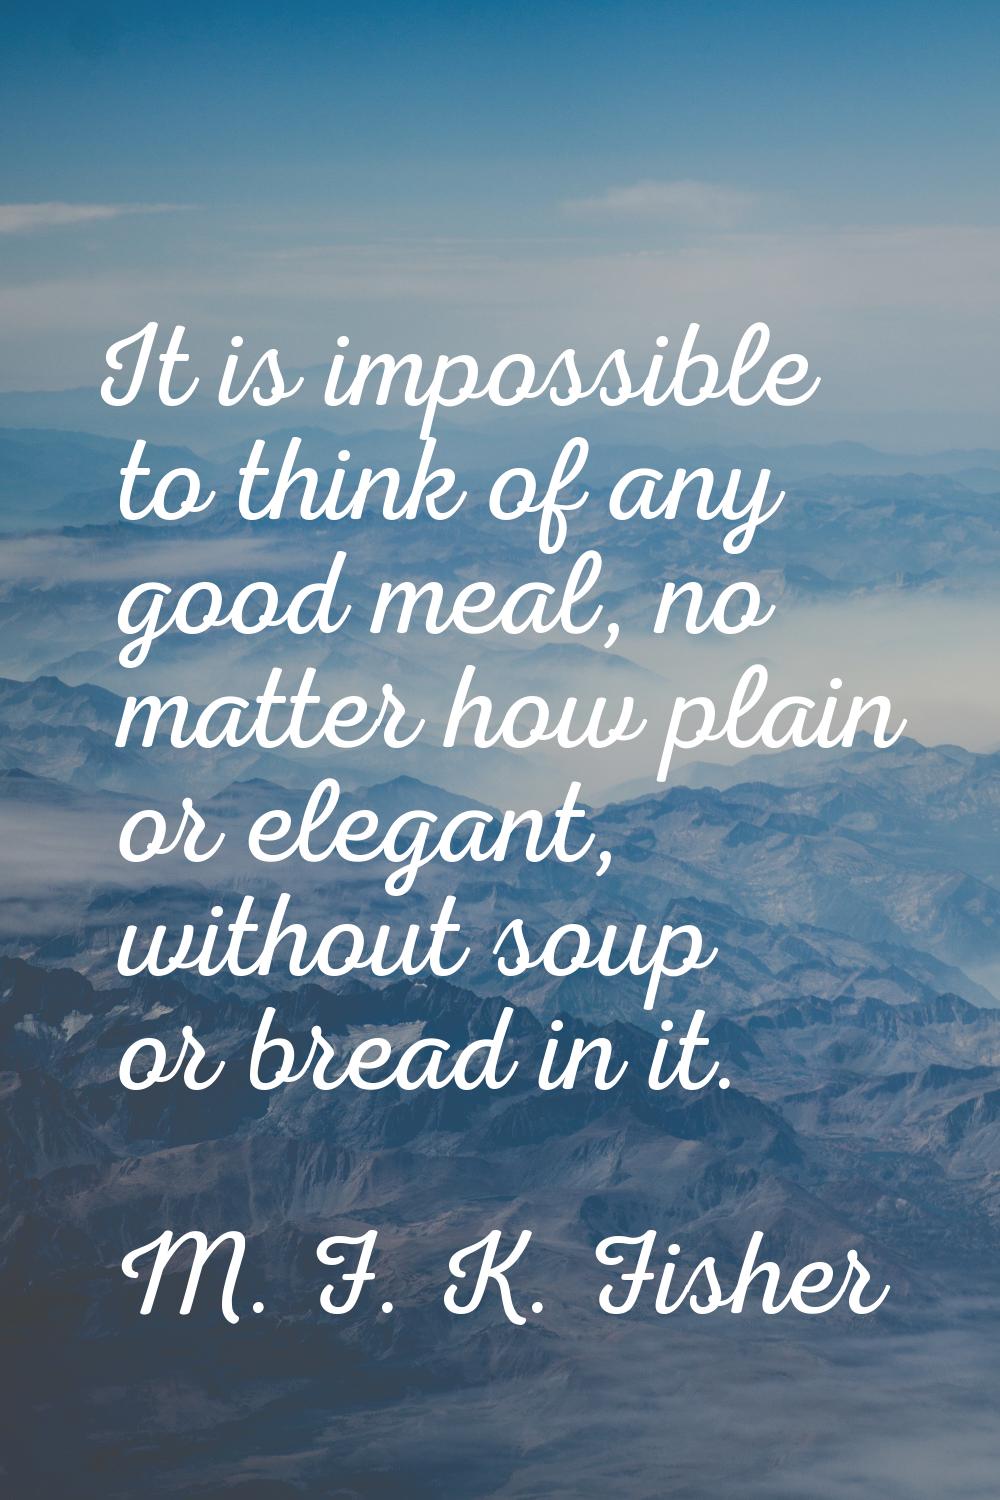 It is impossible to think of any good meal, no matter how plain or elegant, without soup or bread i